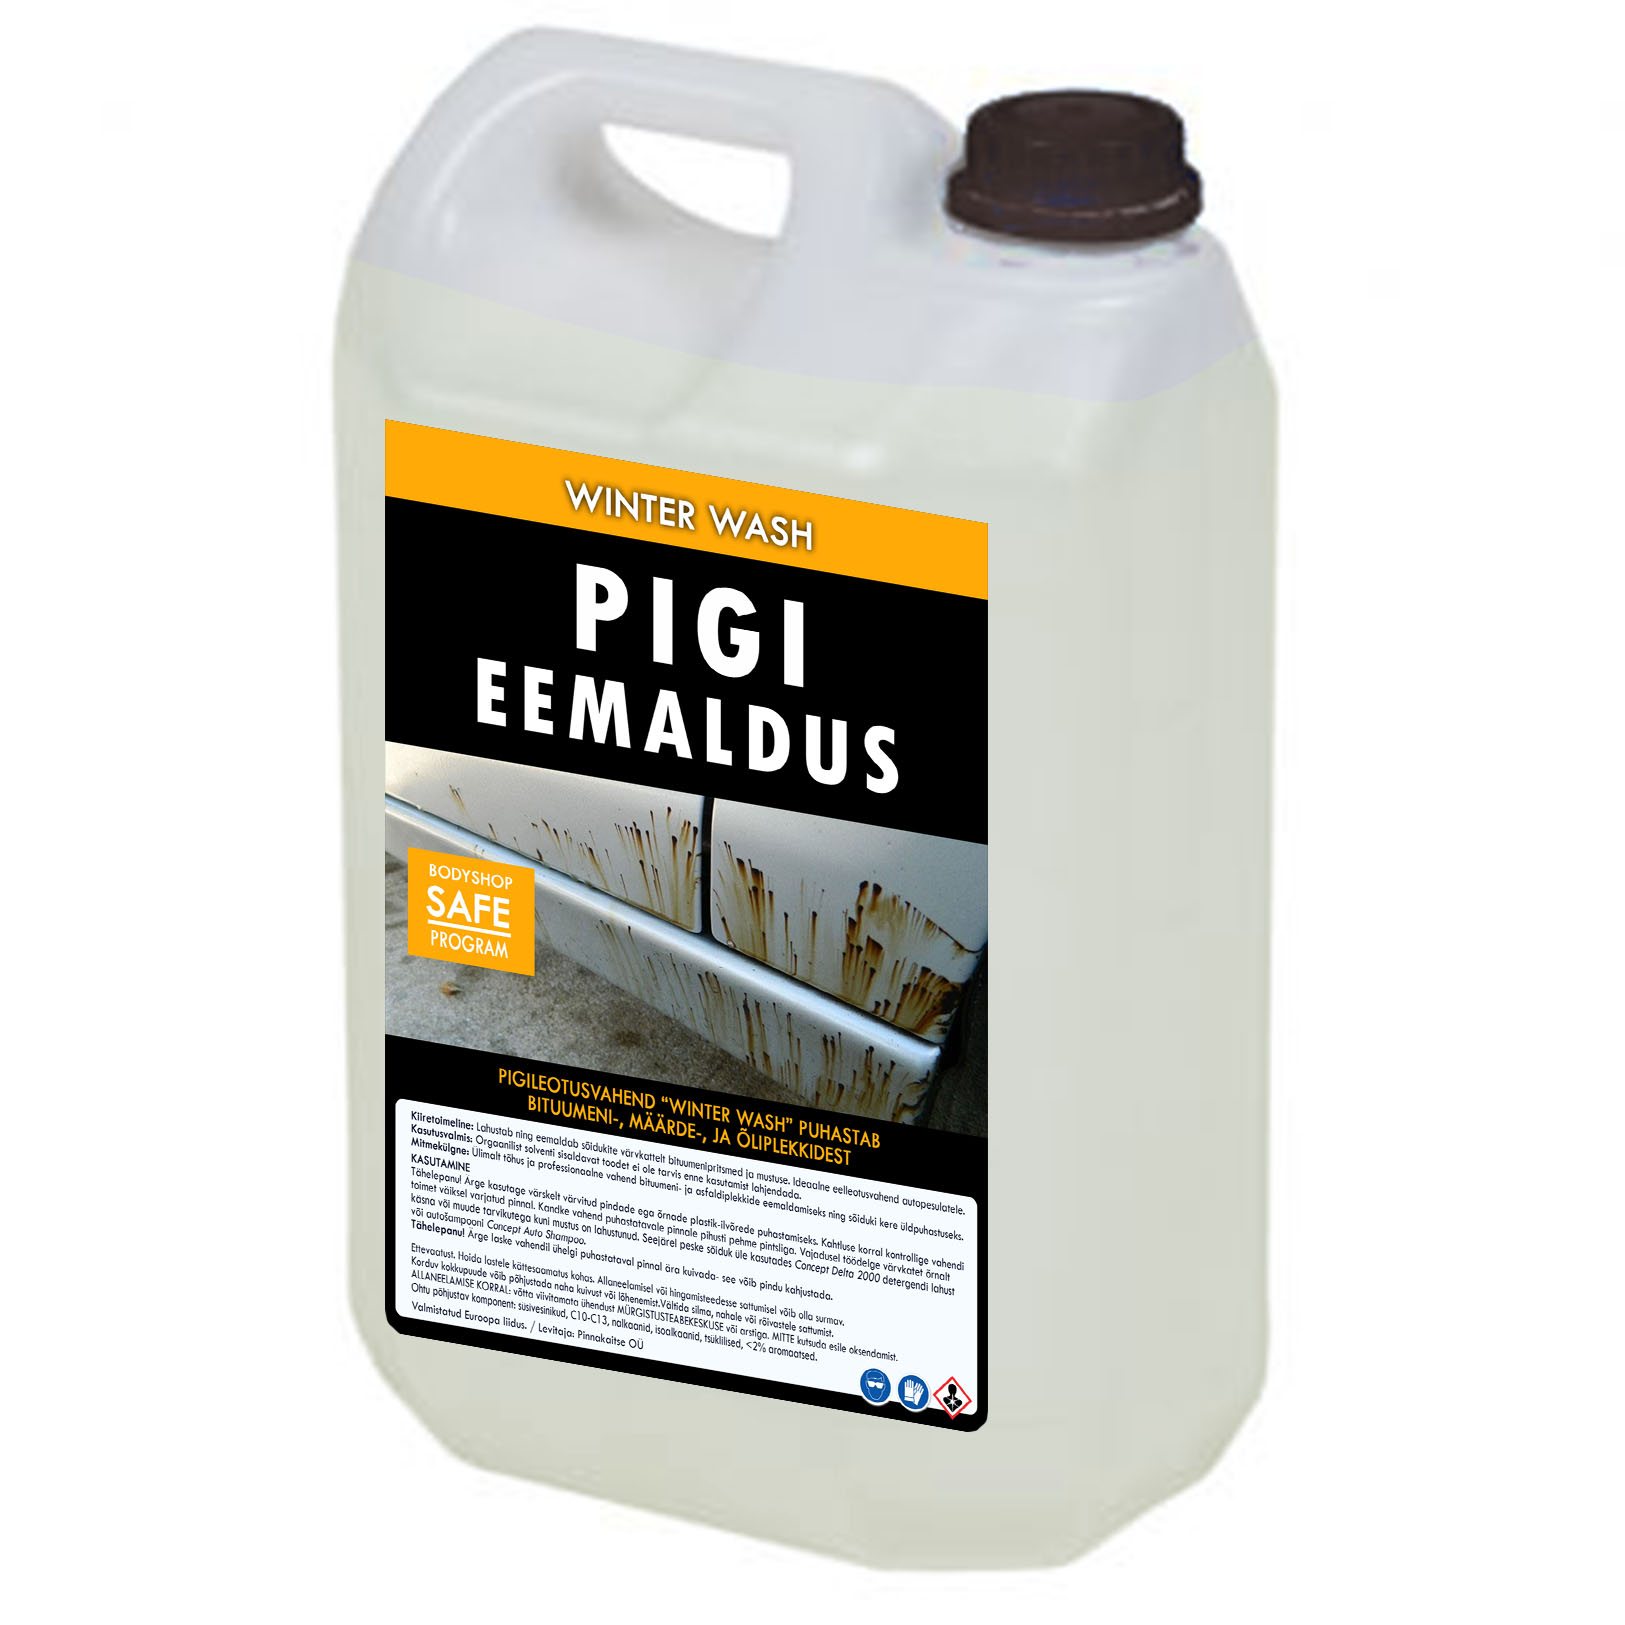 Pitch remover